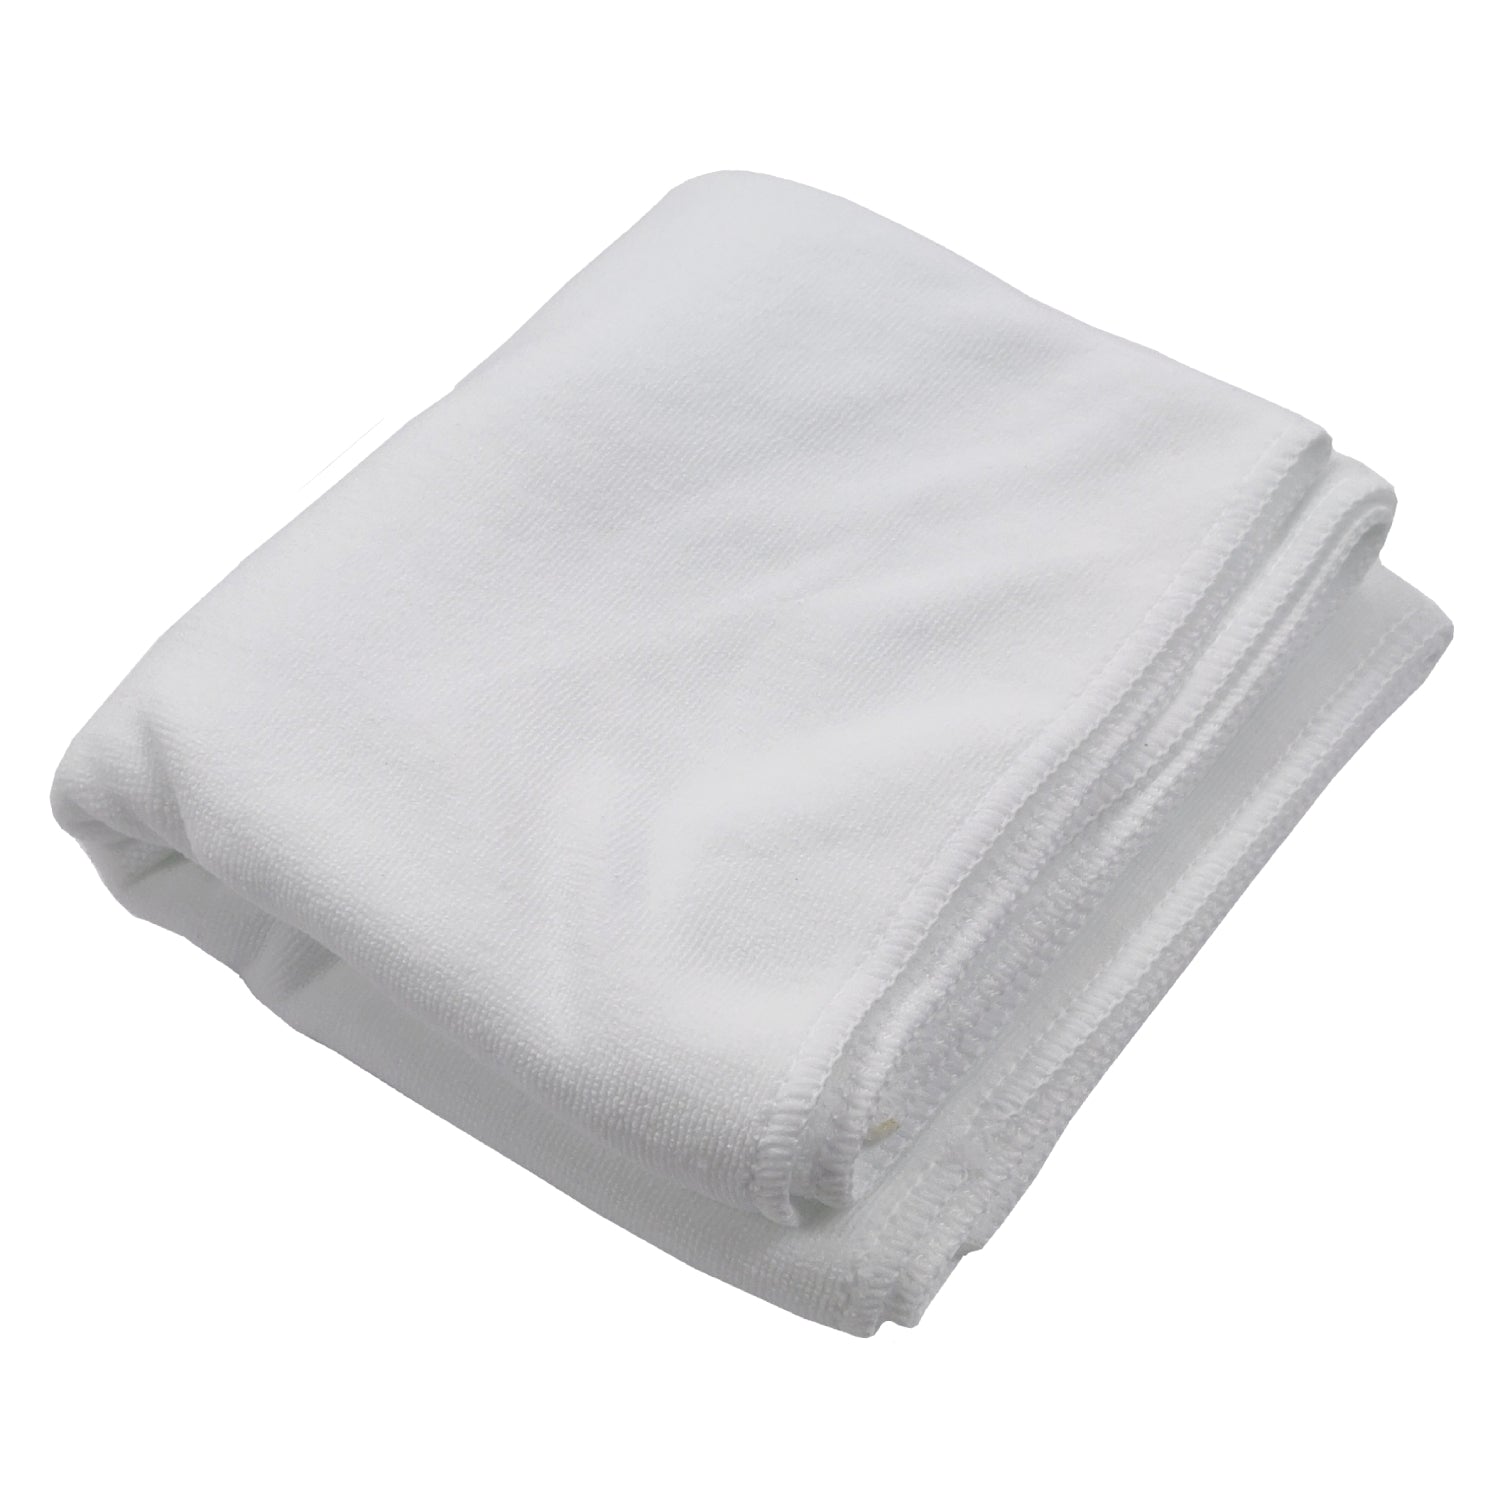 100 polyester towels